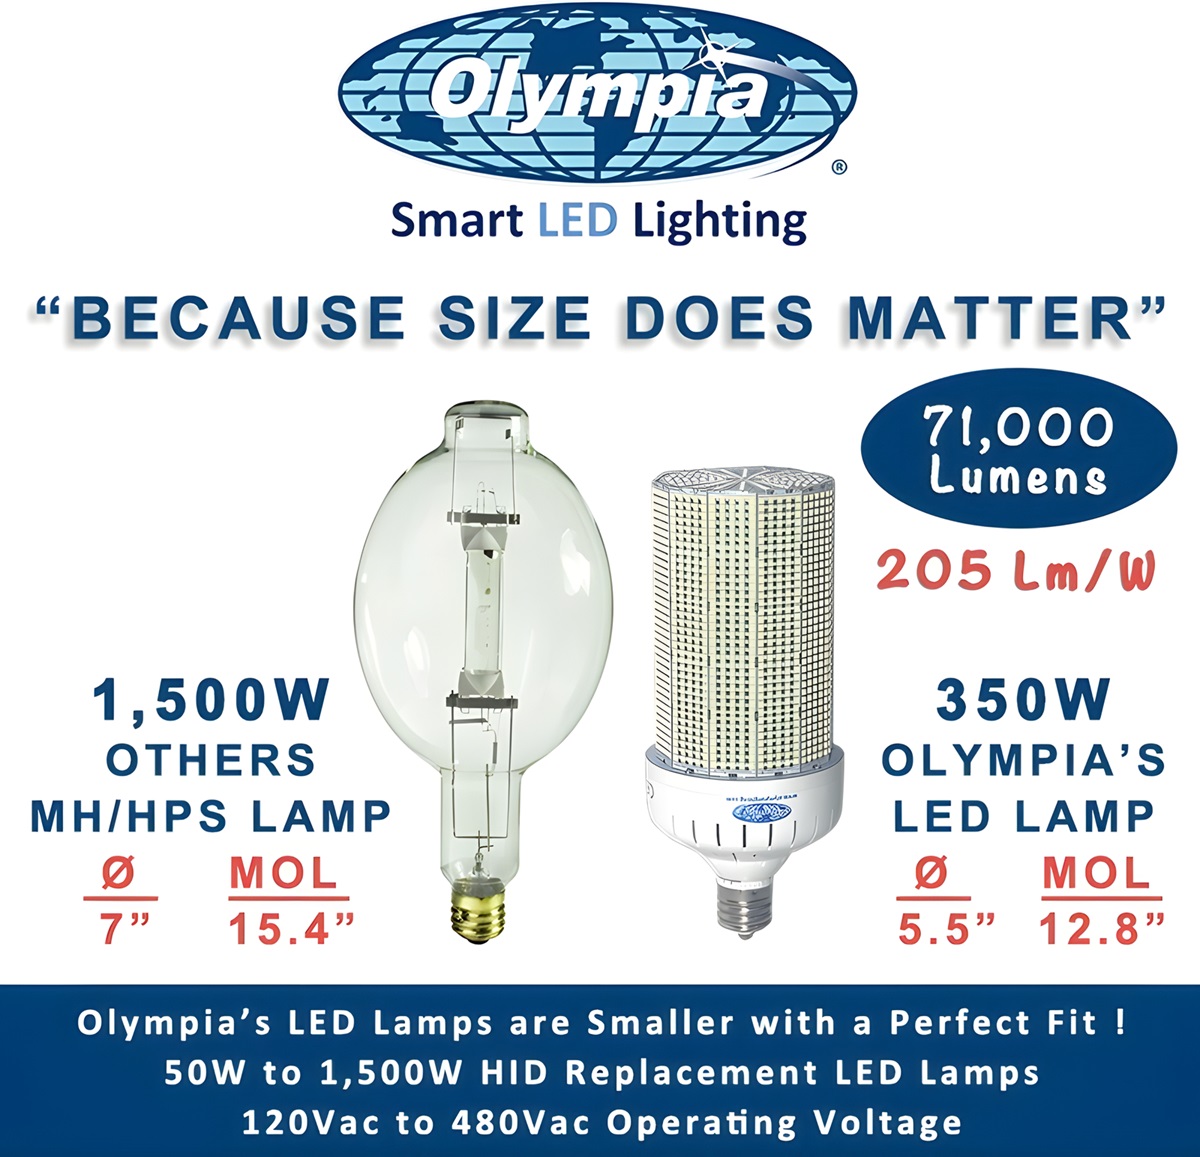 Olympia Lighting Introduces 350W High Power HID Replacement LED Light Bulbs